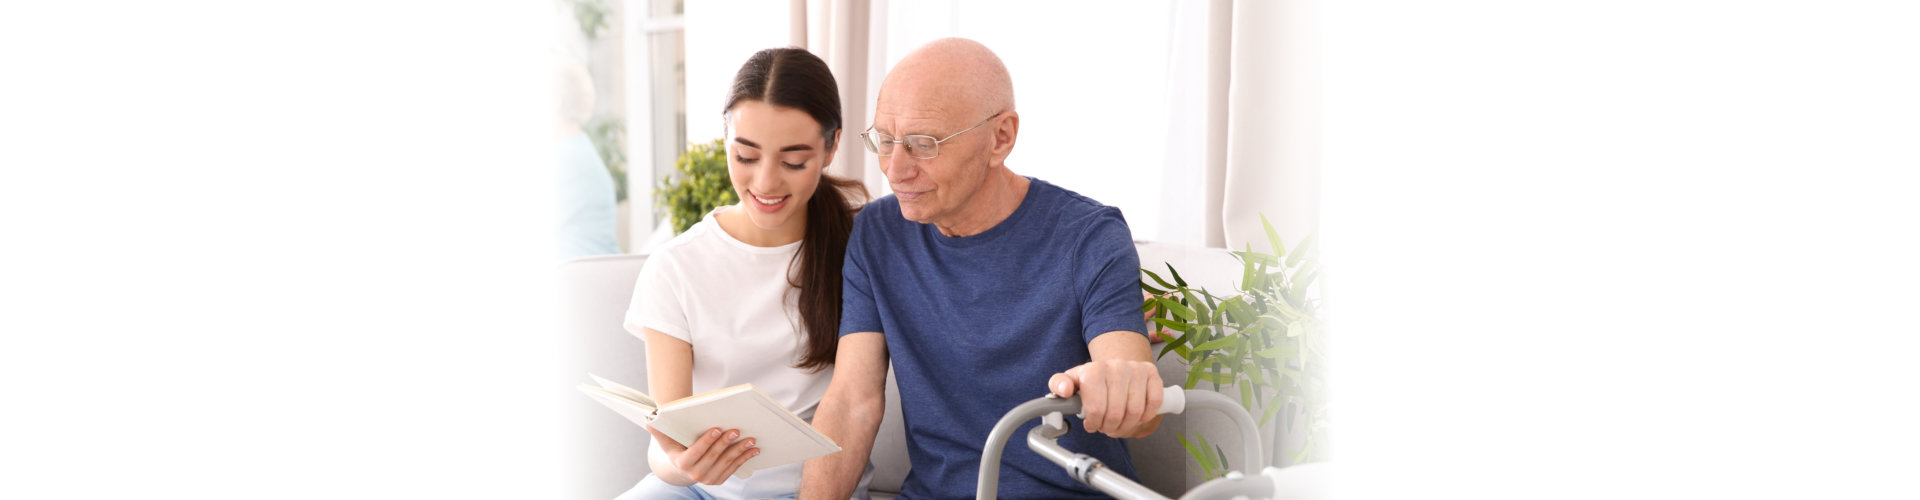 young woman holding a book and teaching the old man to read or talk